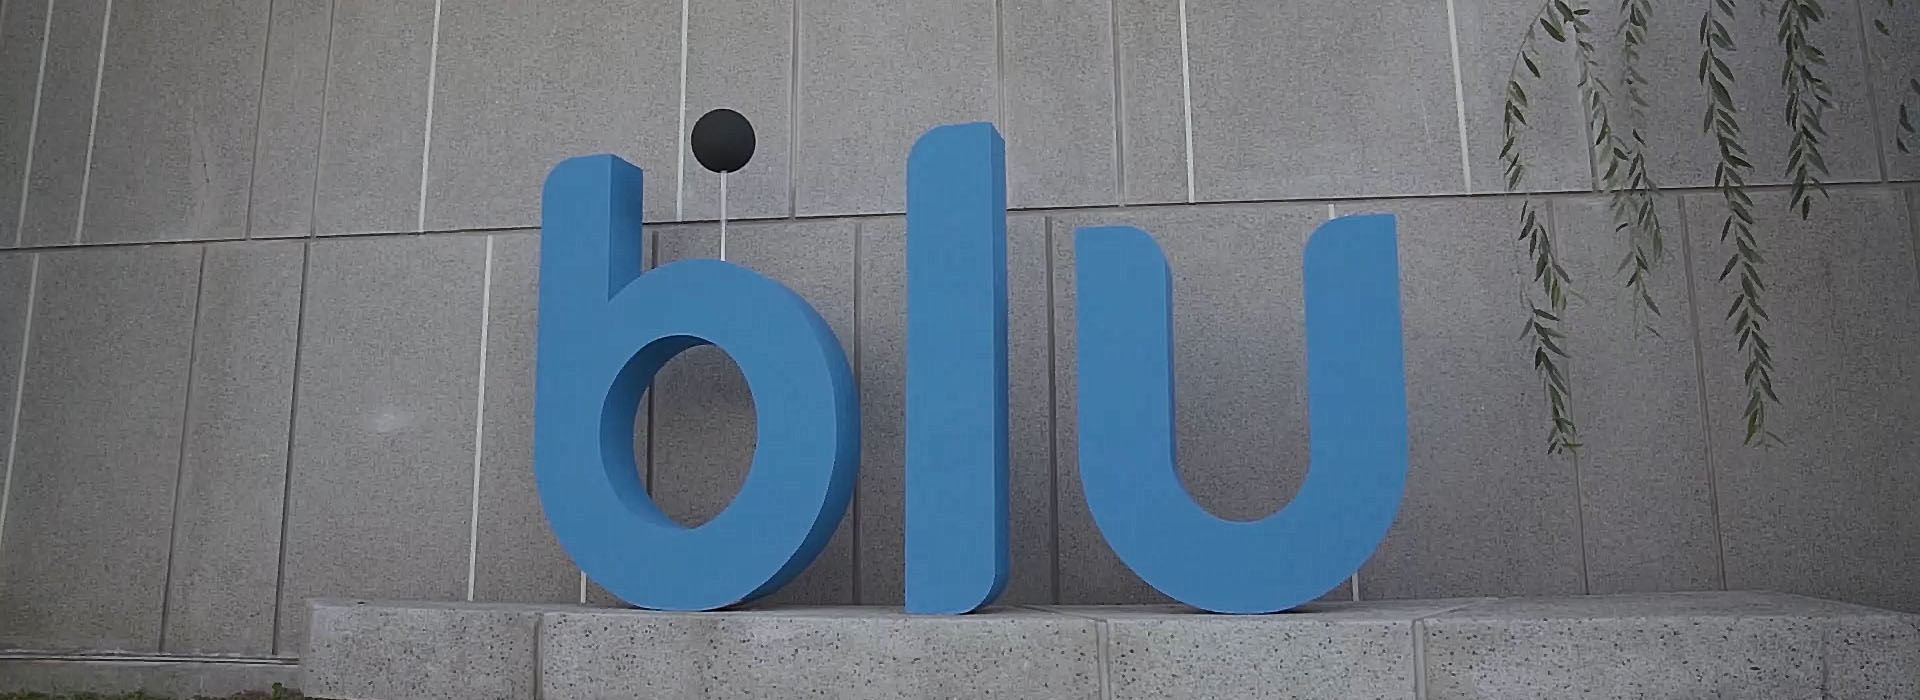 blu Bank Logo set up in the Karman house garden for the press event